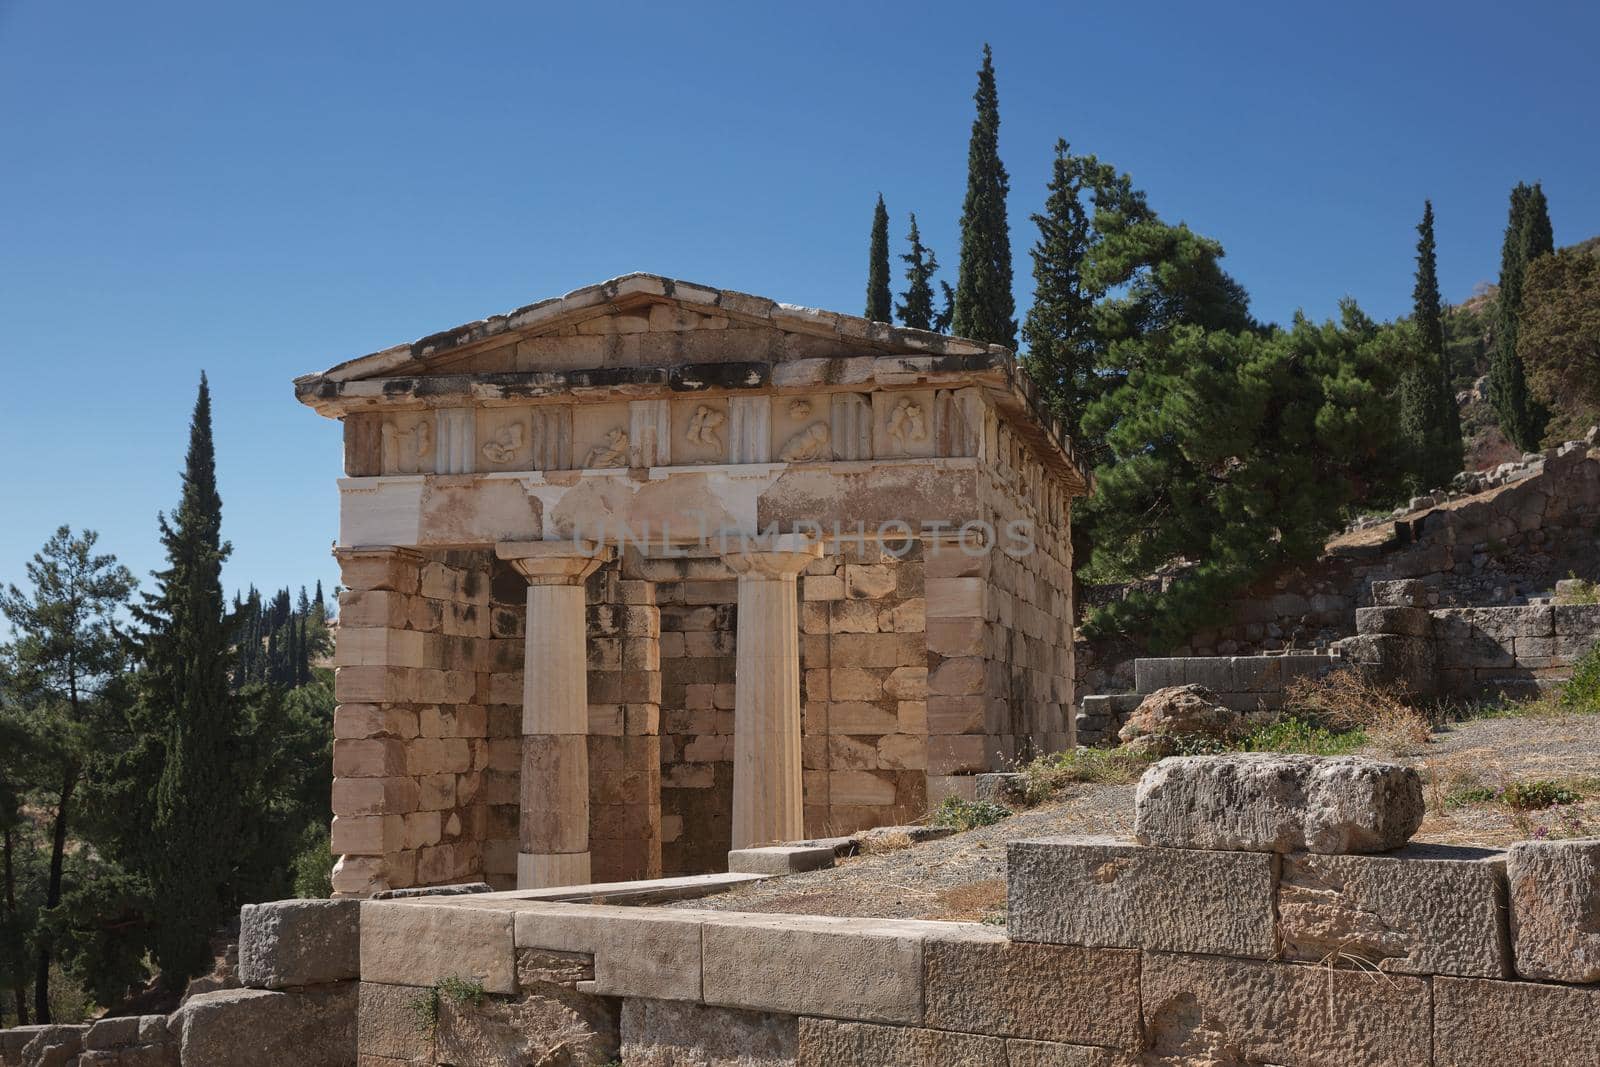 Athenian Treasure in Delphi, Greece, ancient sanctuary that grew rich as seat of oracle that was consulted on important decisions throughout ancient classical world. UNESCO World heritage.